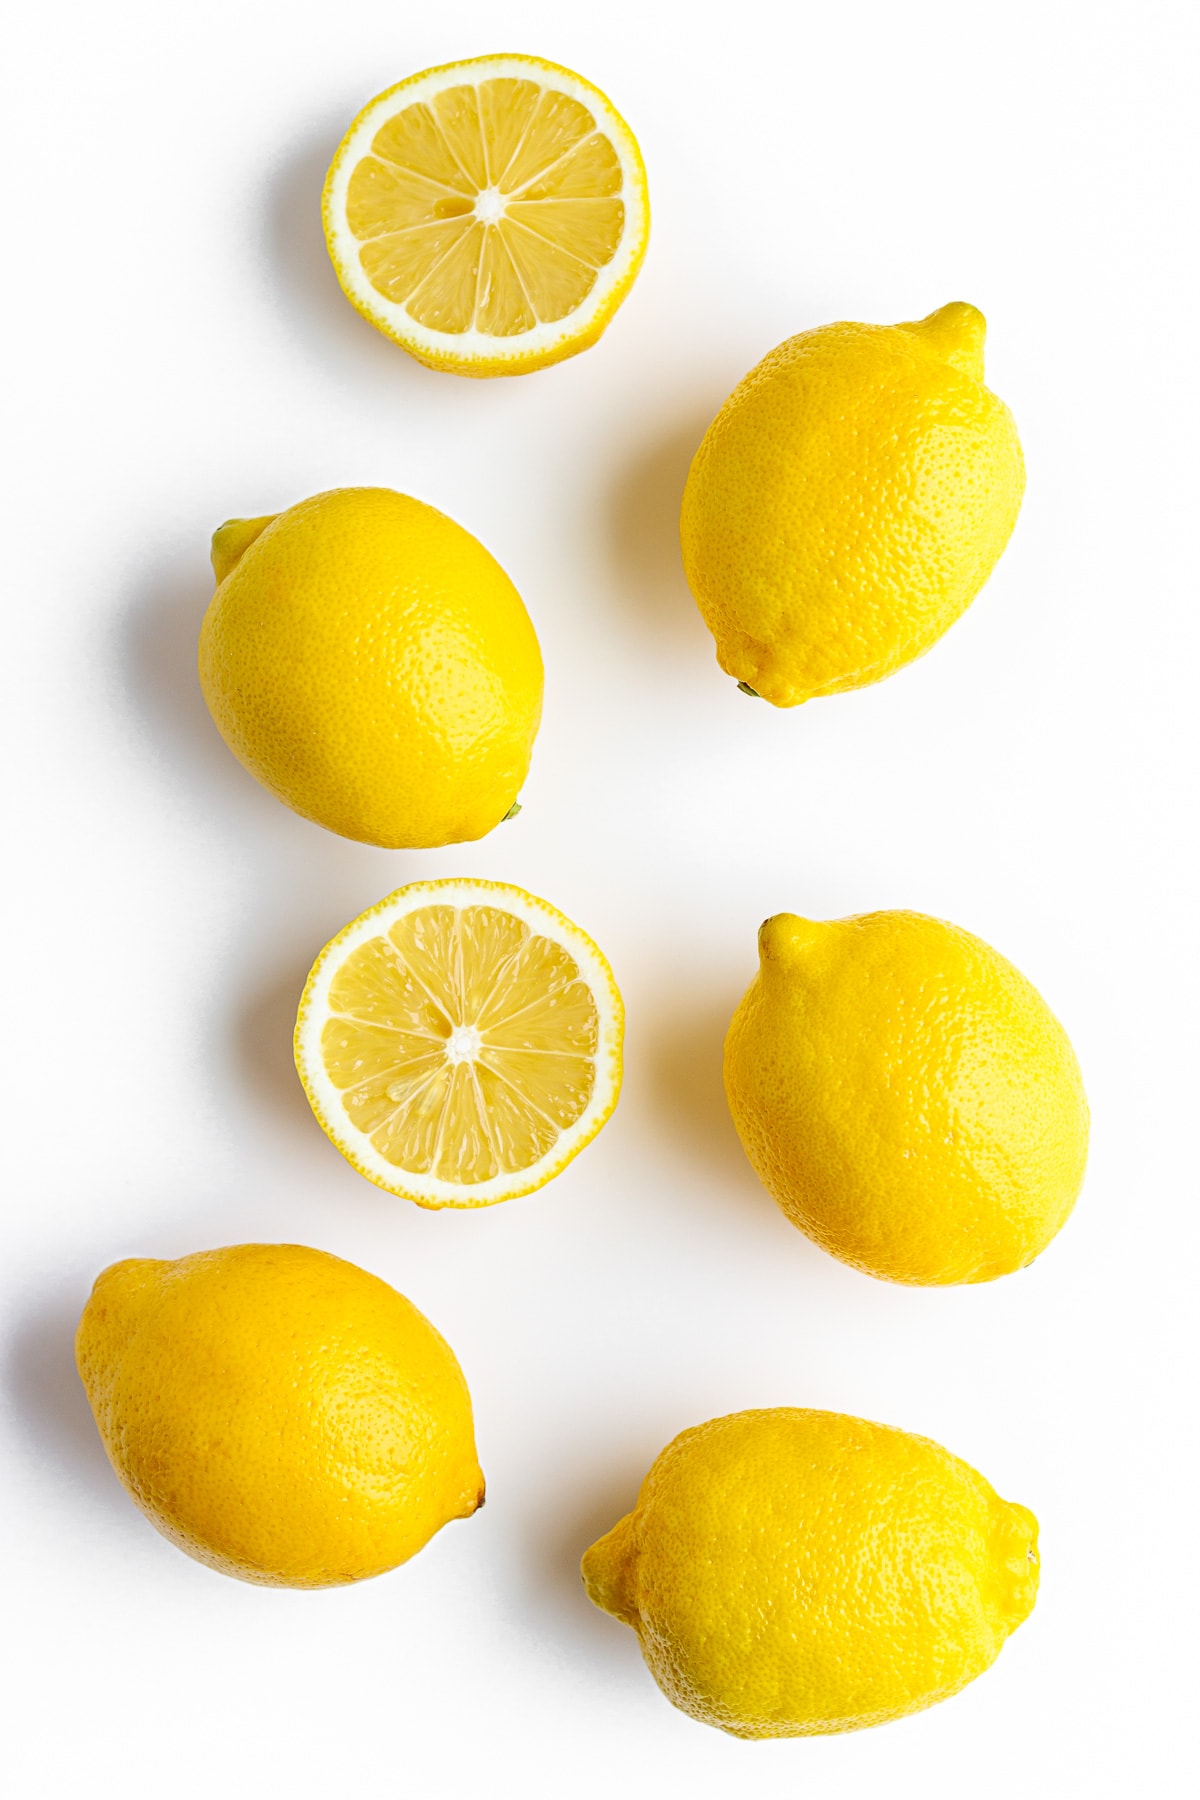 Bunch of whole and halved lemons arranged on a white background.